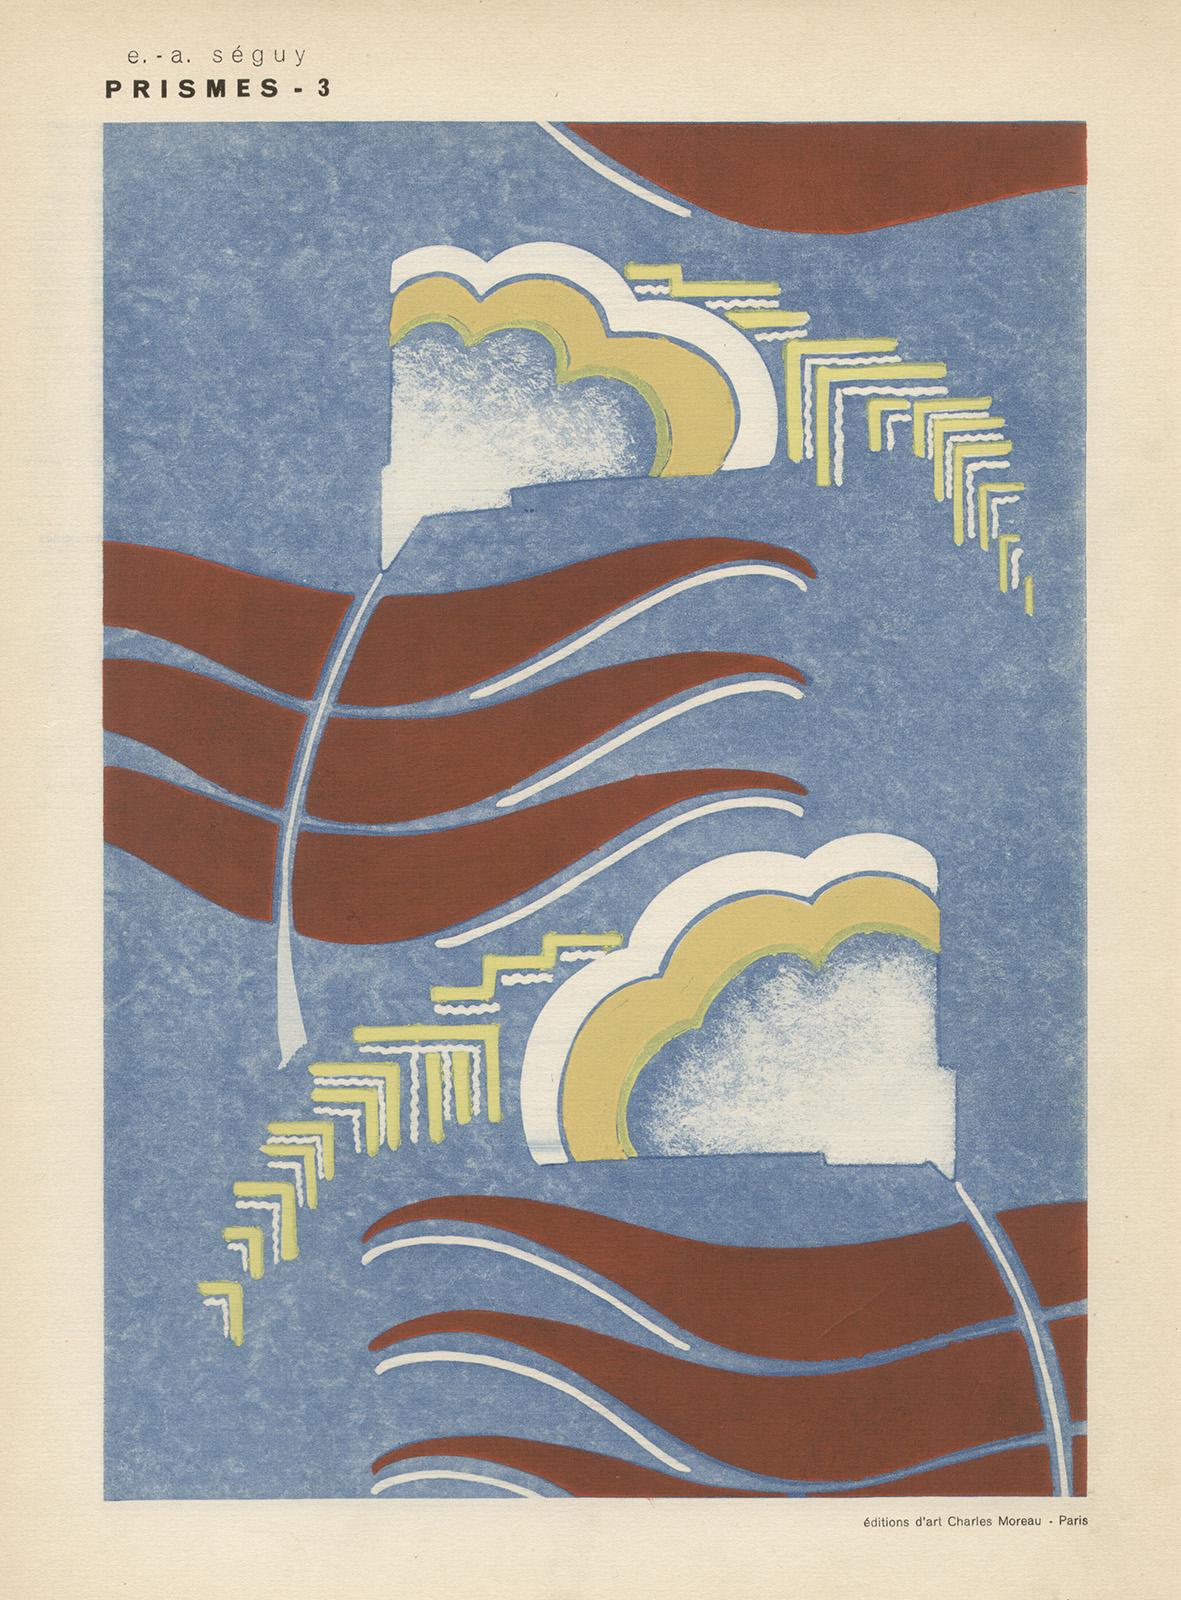 Prismes - A series of six French Art Deco pochoir designs - Brown Abstract Print by Eugene Seguy